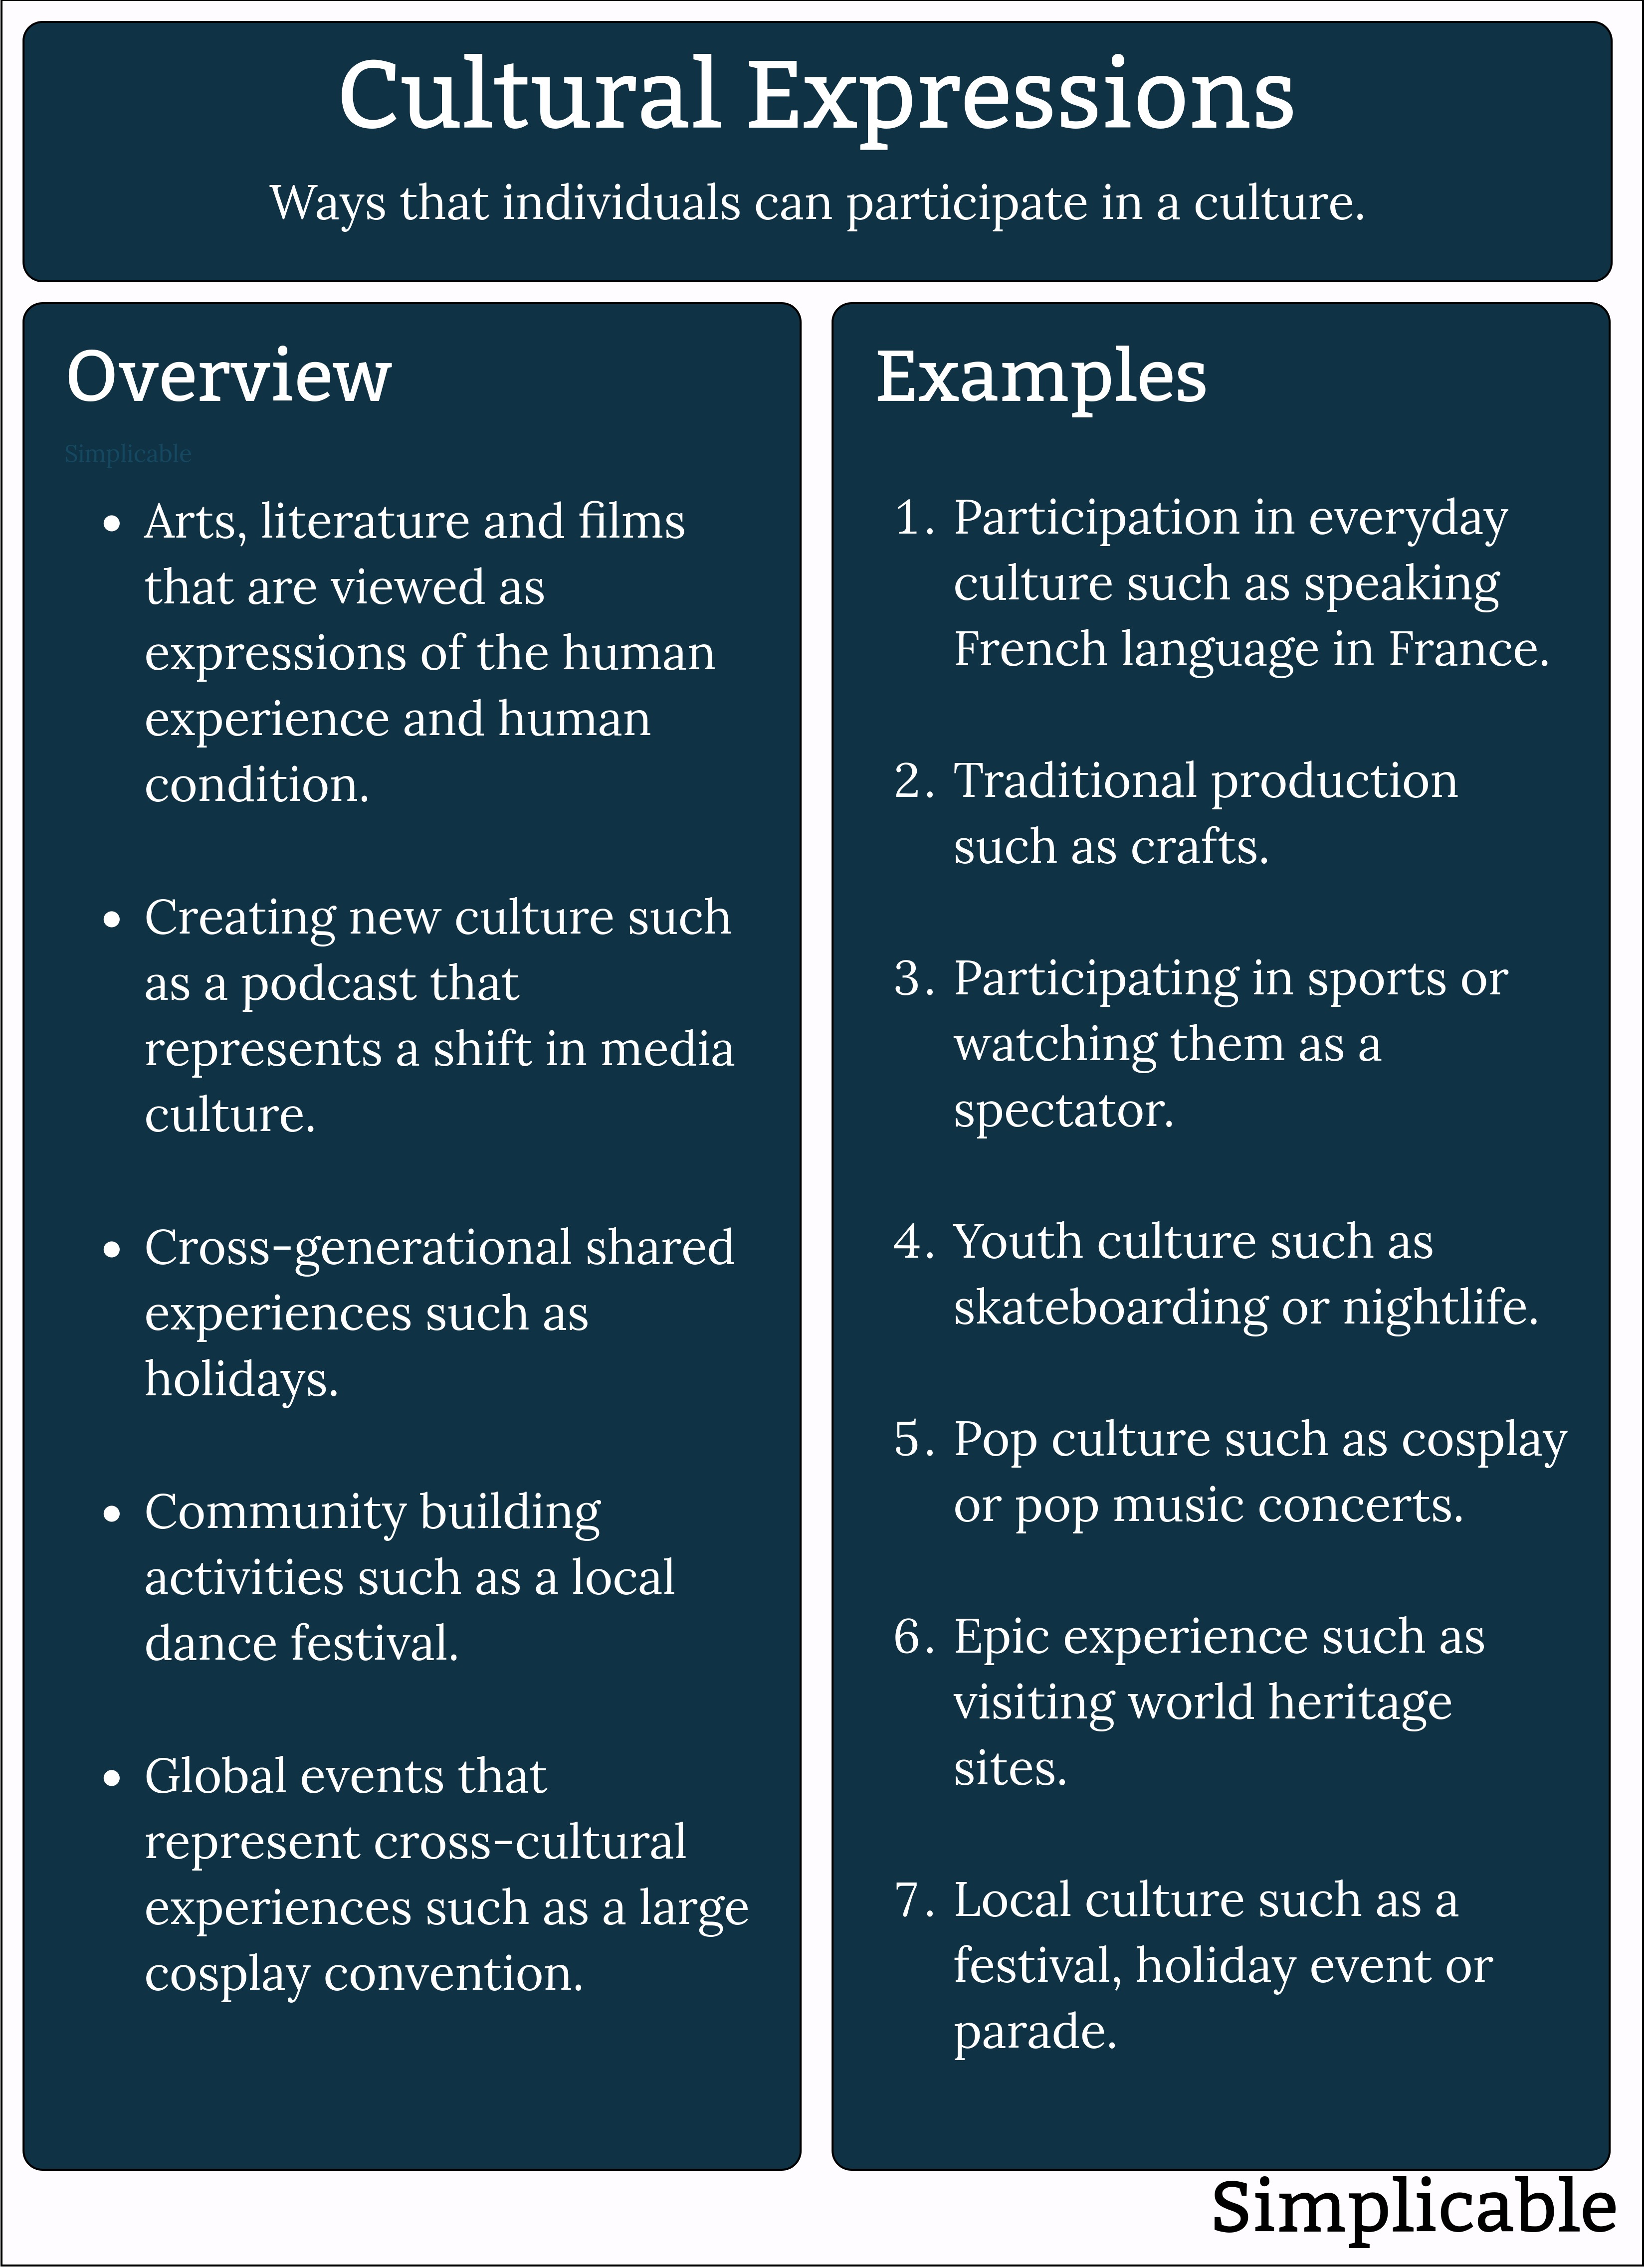 cultural expressions overview and examples